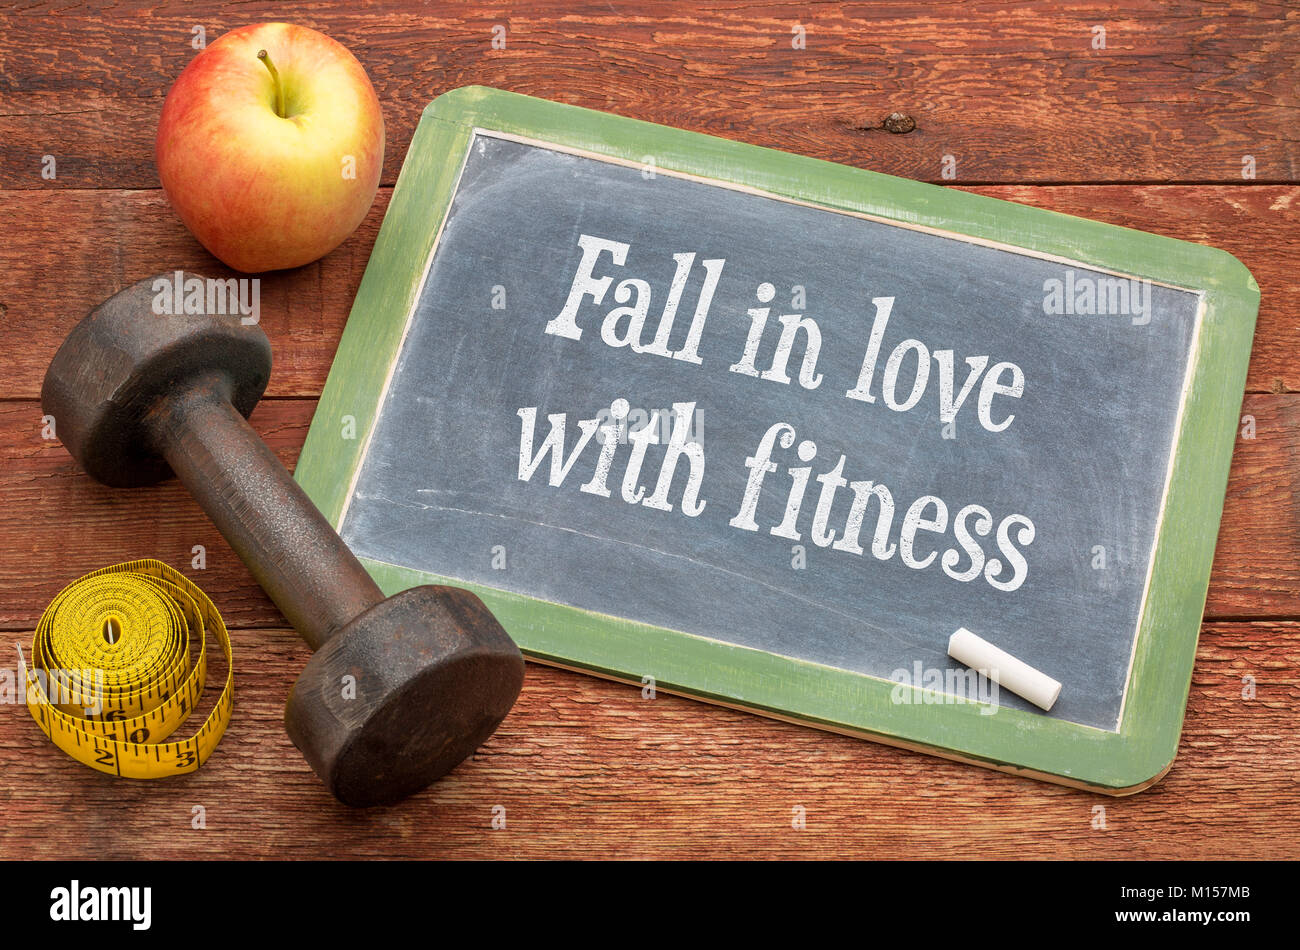 fall in love with fitness -  slate blackboard sign against weathered red painted barn wood with a dumbbell, apple and tape measure Stock Photo